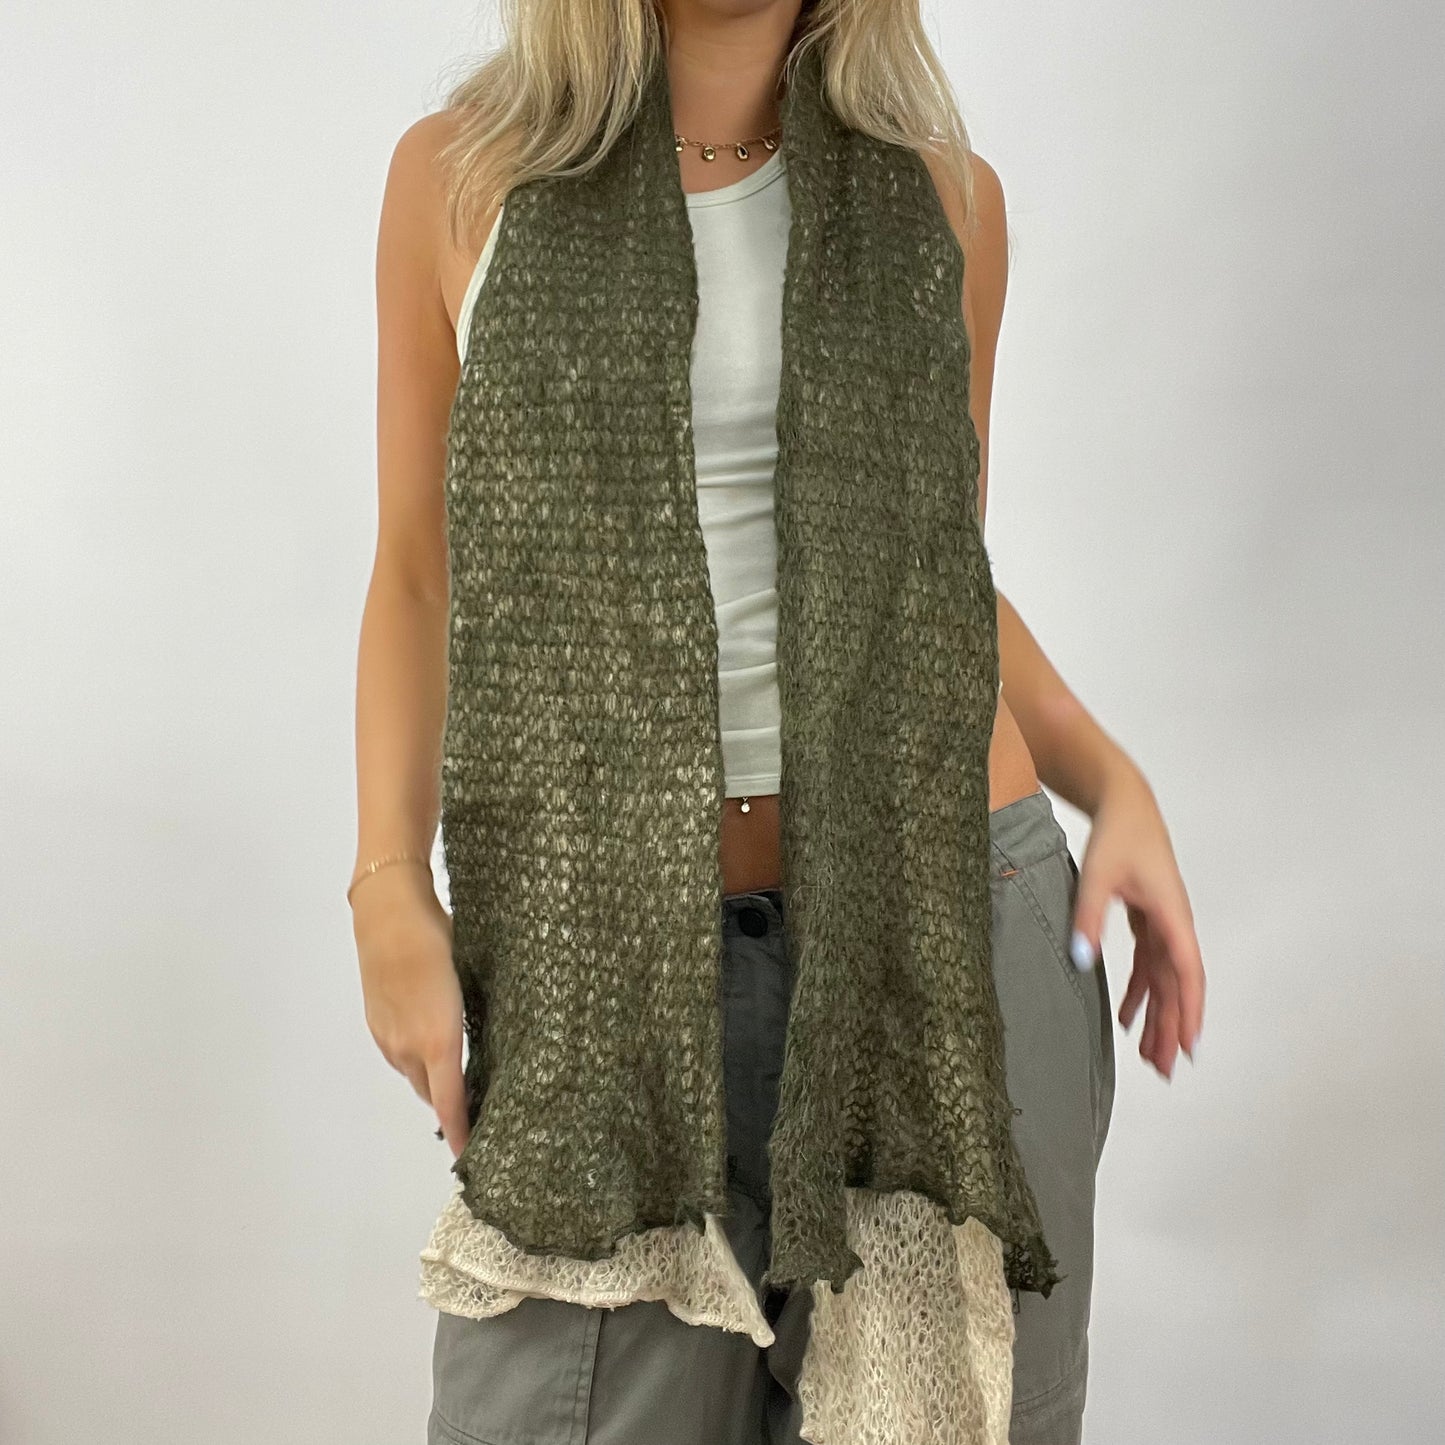 GORPCORE DROP | green and cream knit scarf